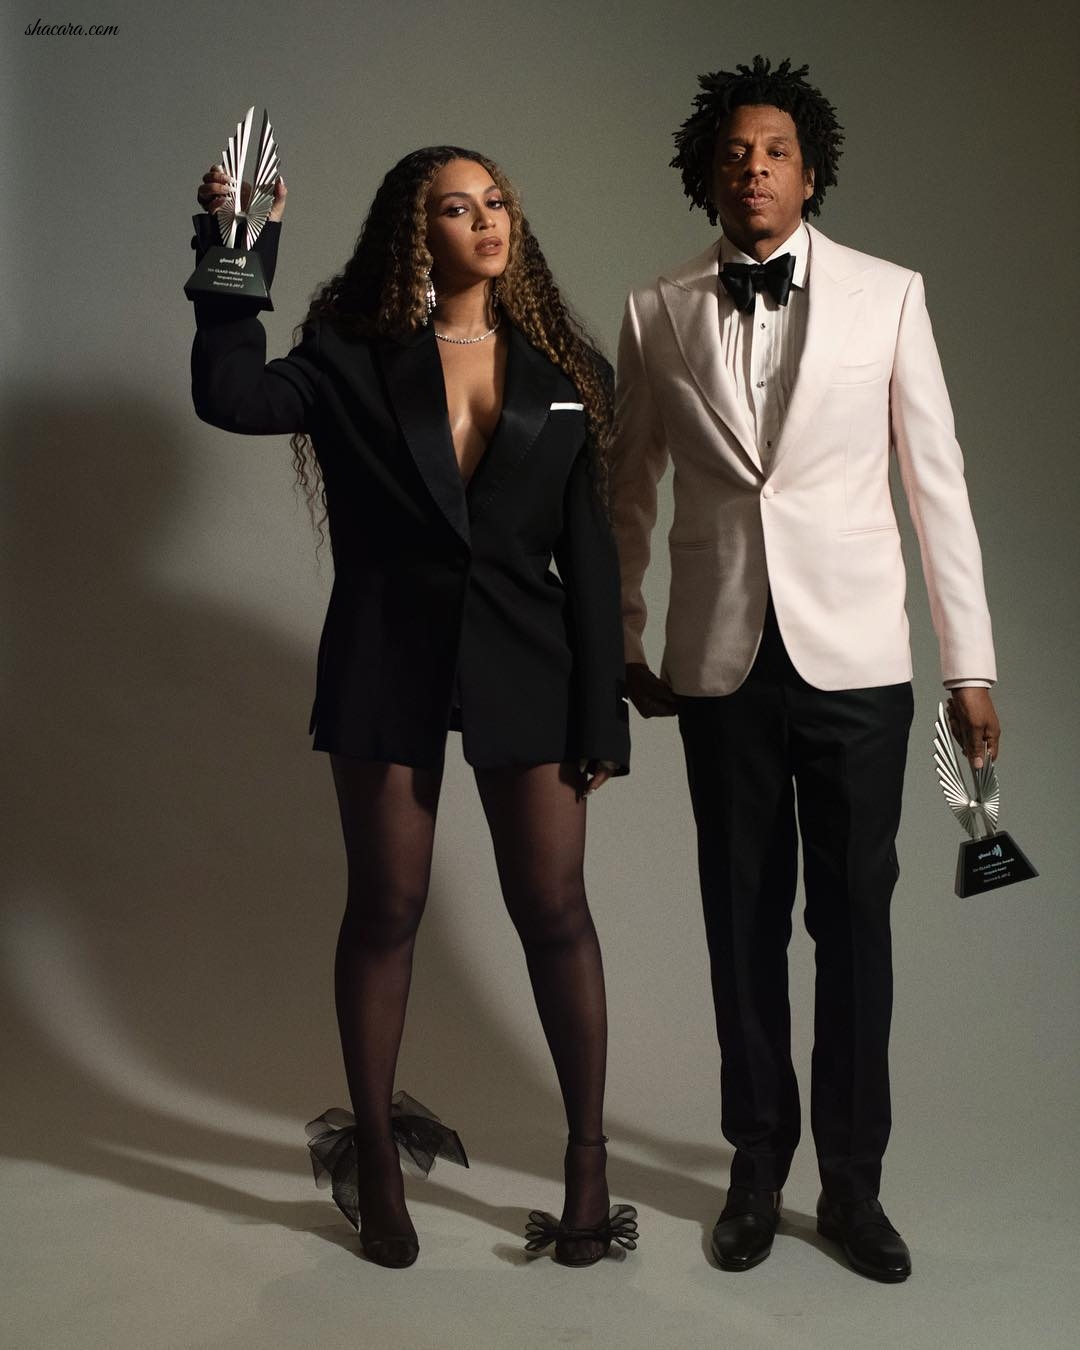 Beyoncé And Jay-Z Receive Vanguard Award For LGBTQ Advocacy At The 2019 GLAAD Awards